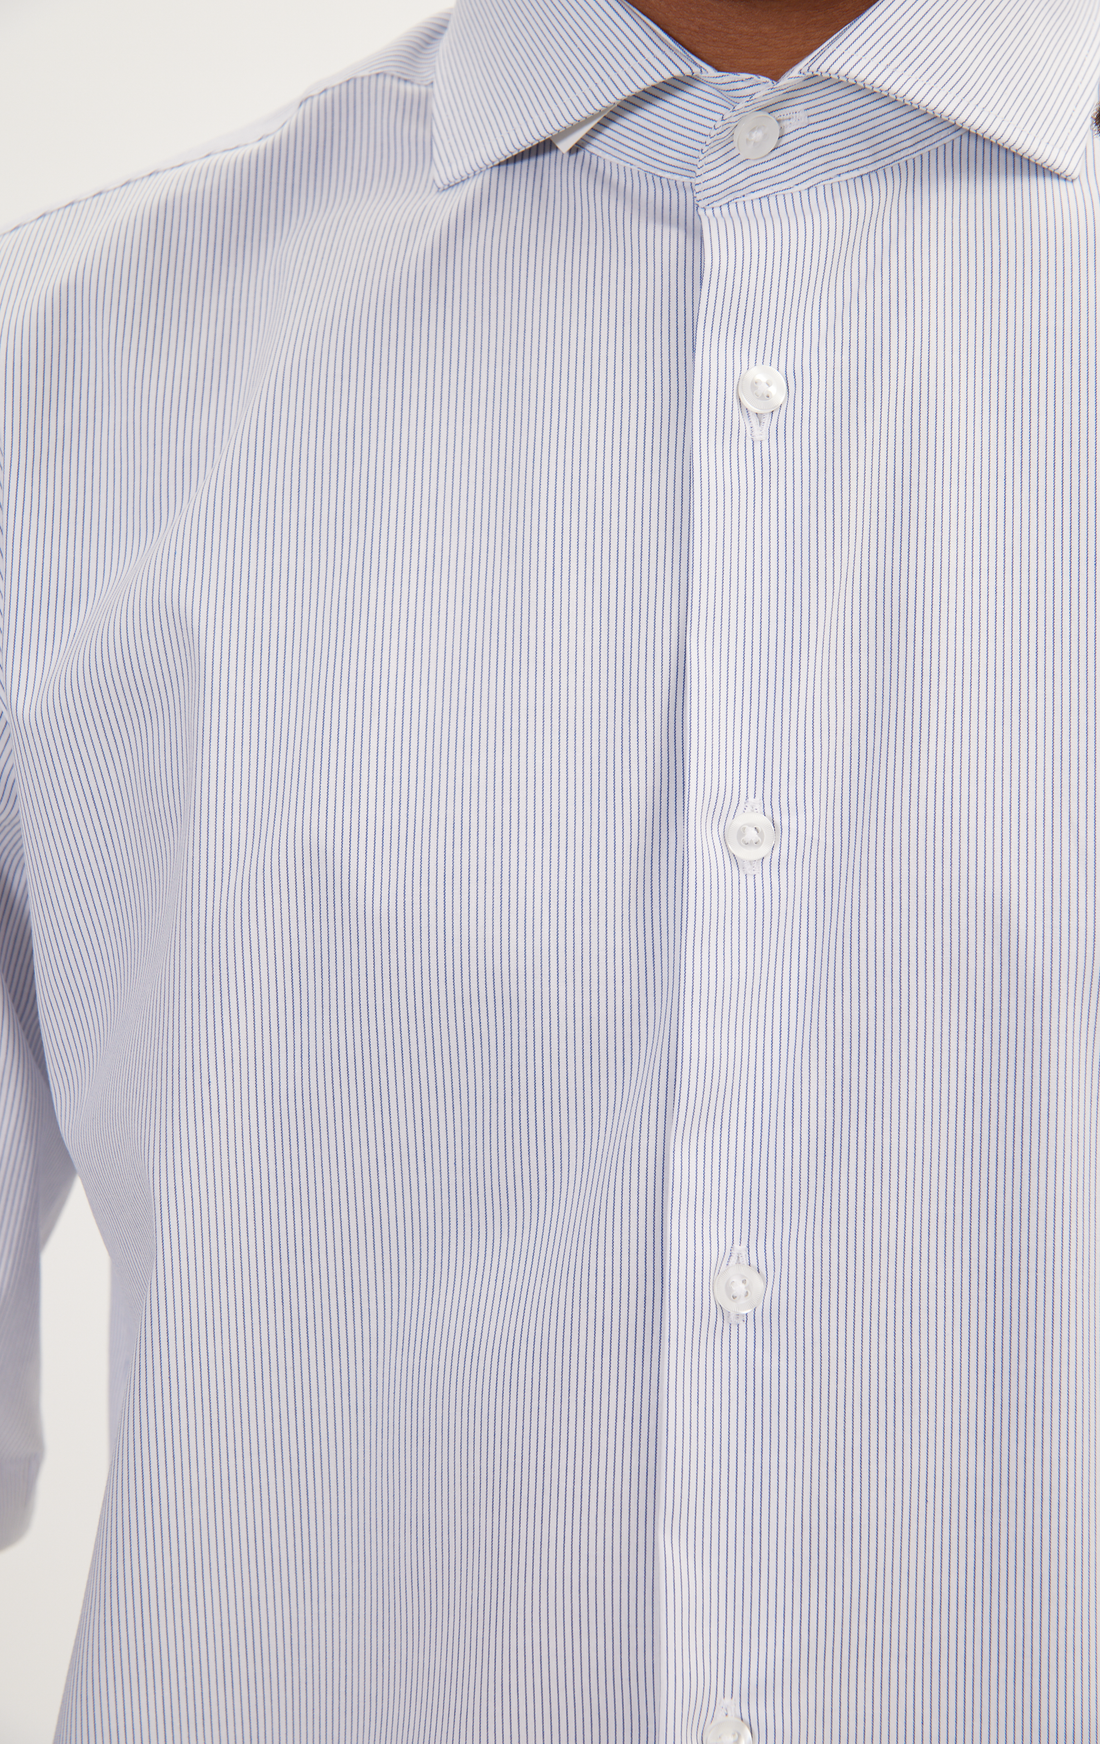 N° AN4902 PURE COTTON FRENCH PLACKET SPREAD COLLAR DRESS SHIRT - WHITE NAVY TWILL